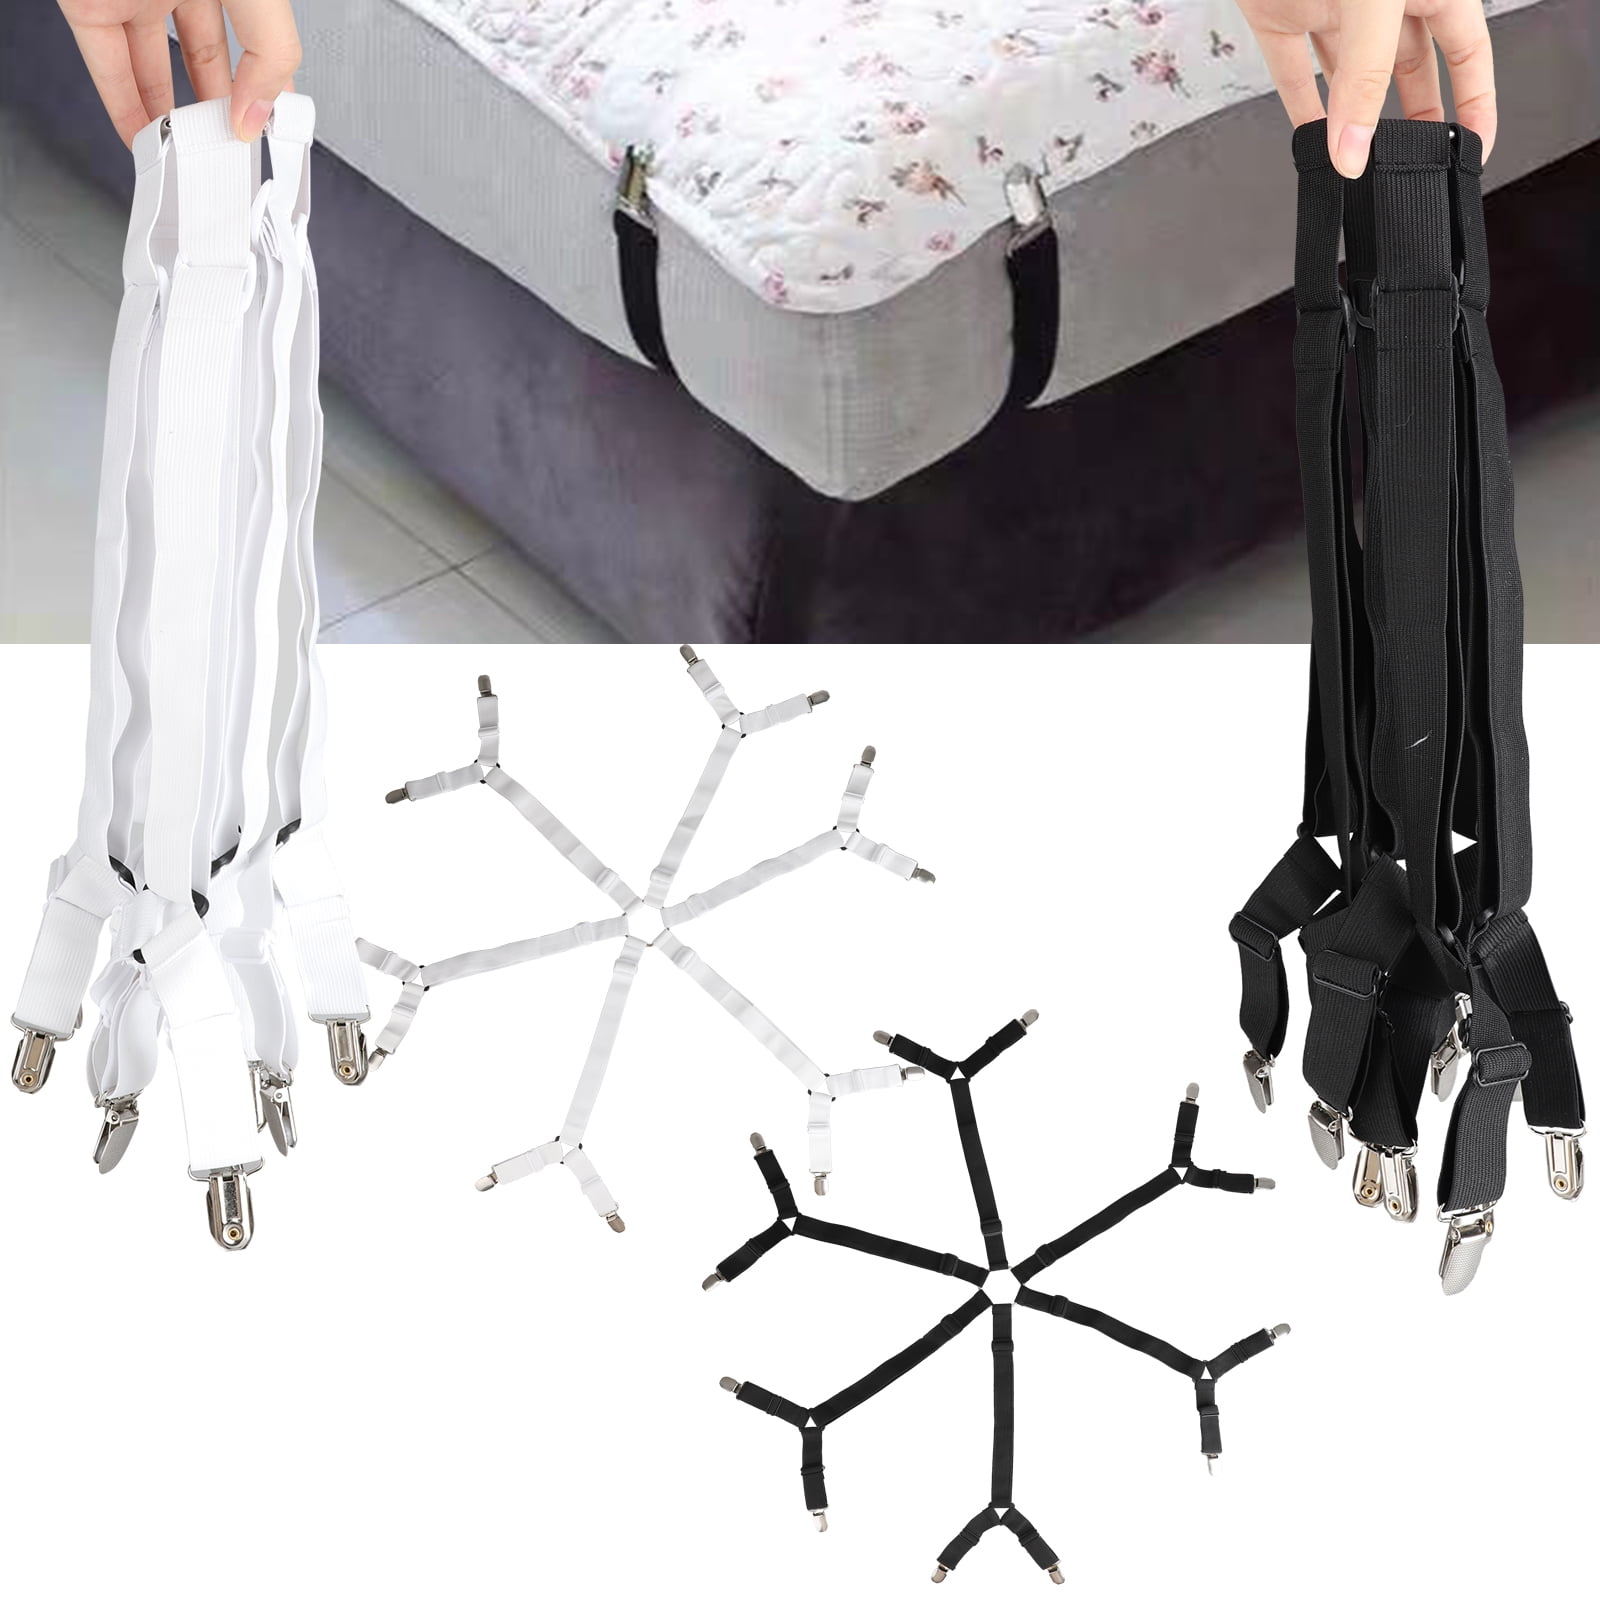 The Nyche Designs Crisscross 2 Way Adjustable Bed Sheet Straps Suspenders Grippers Fasteners for All Bedsheets Fitted Sheets Flat Sheets Set of 2, Black